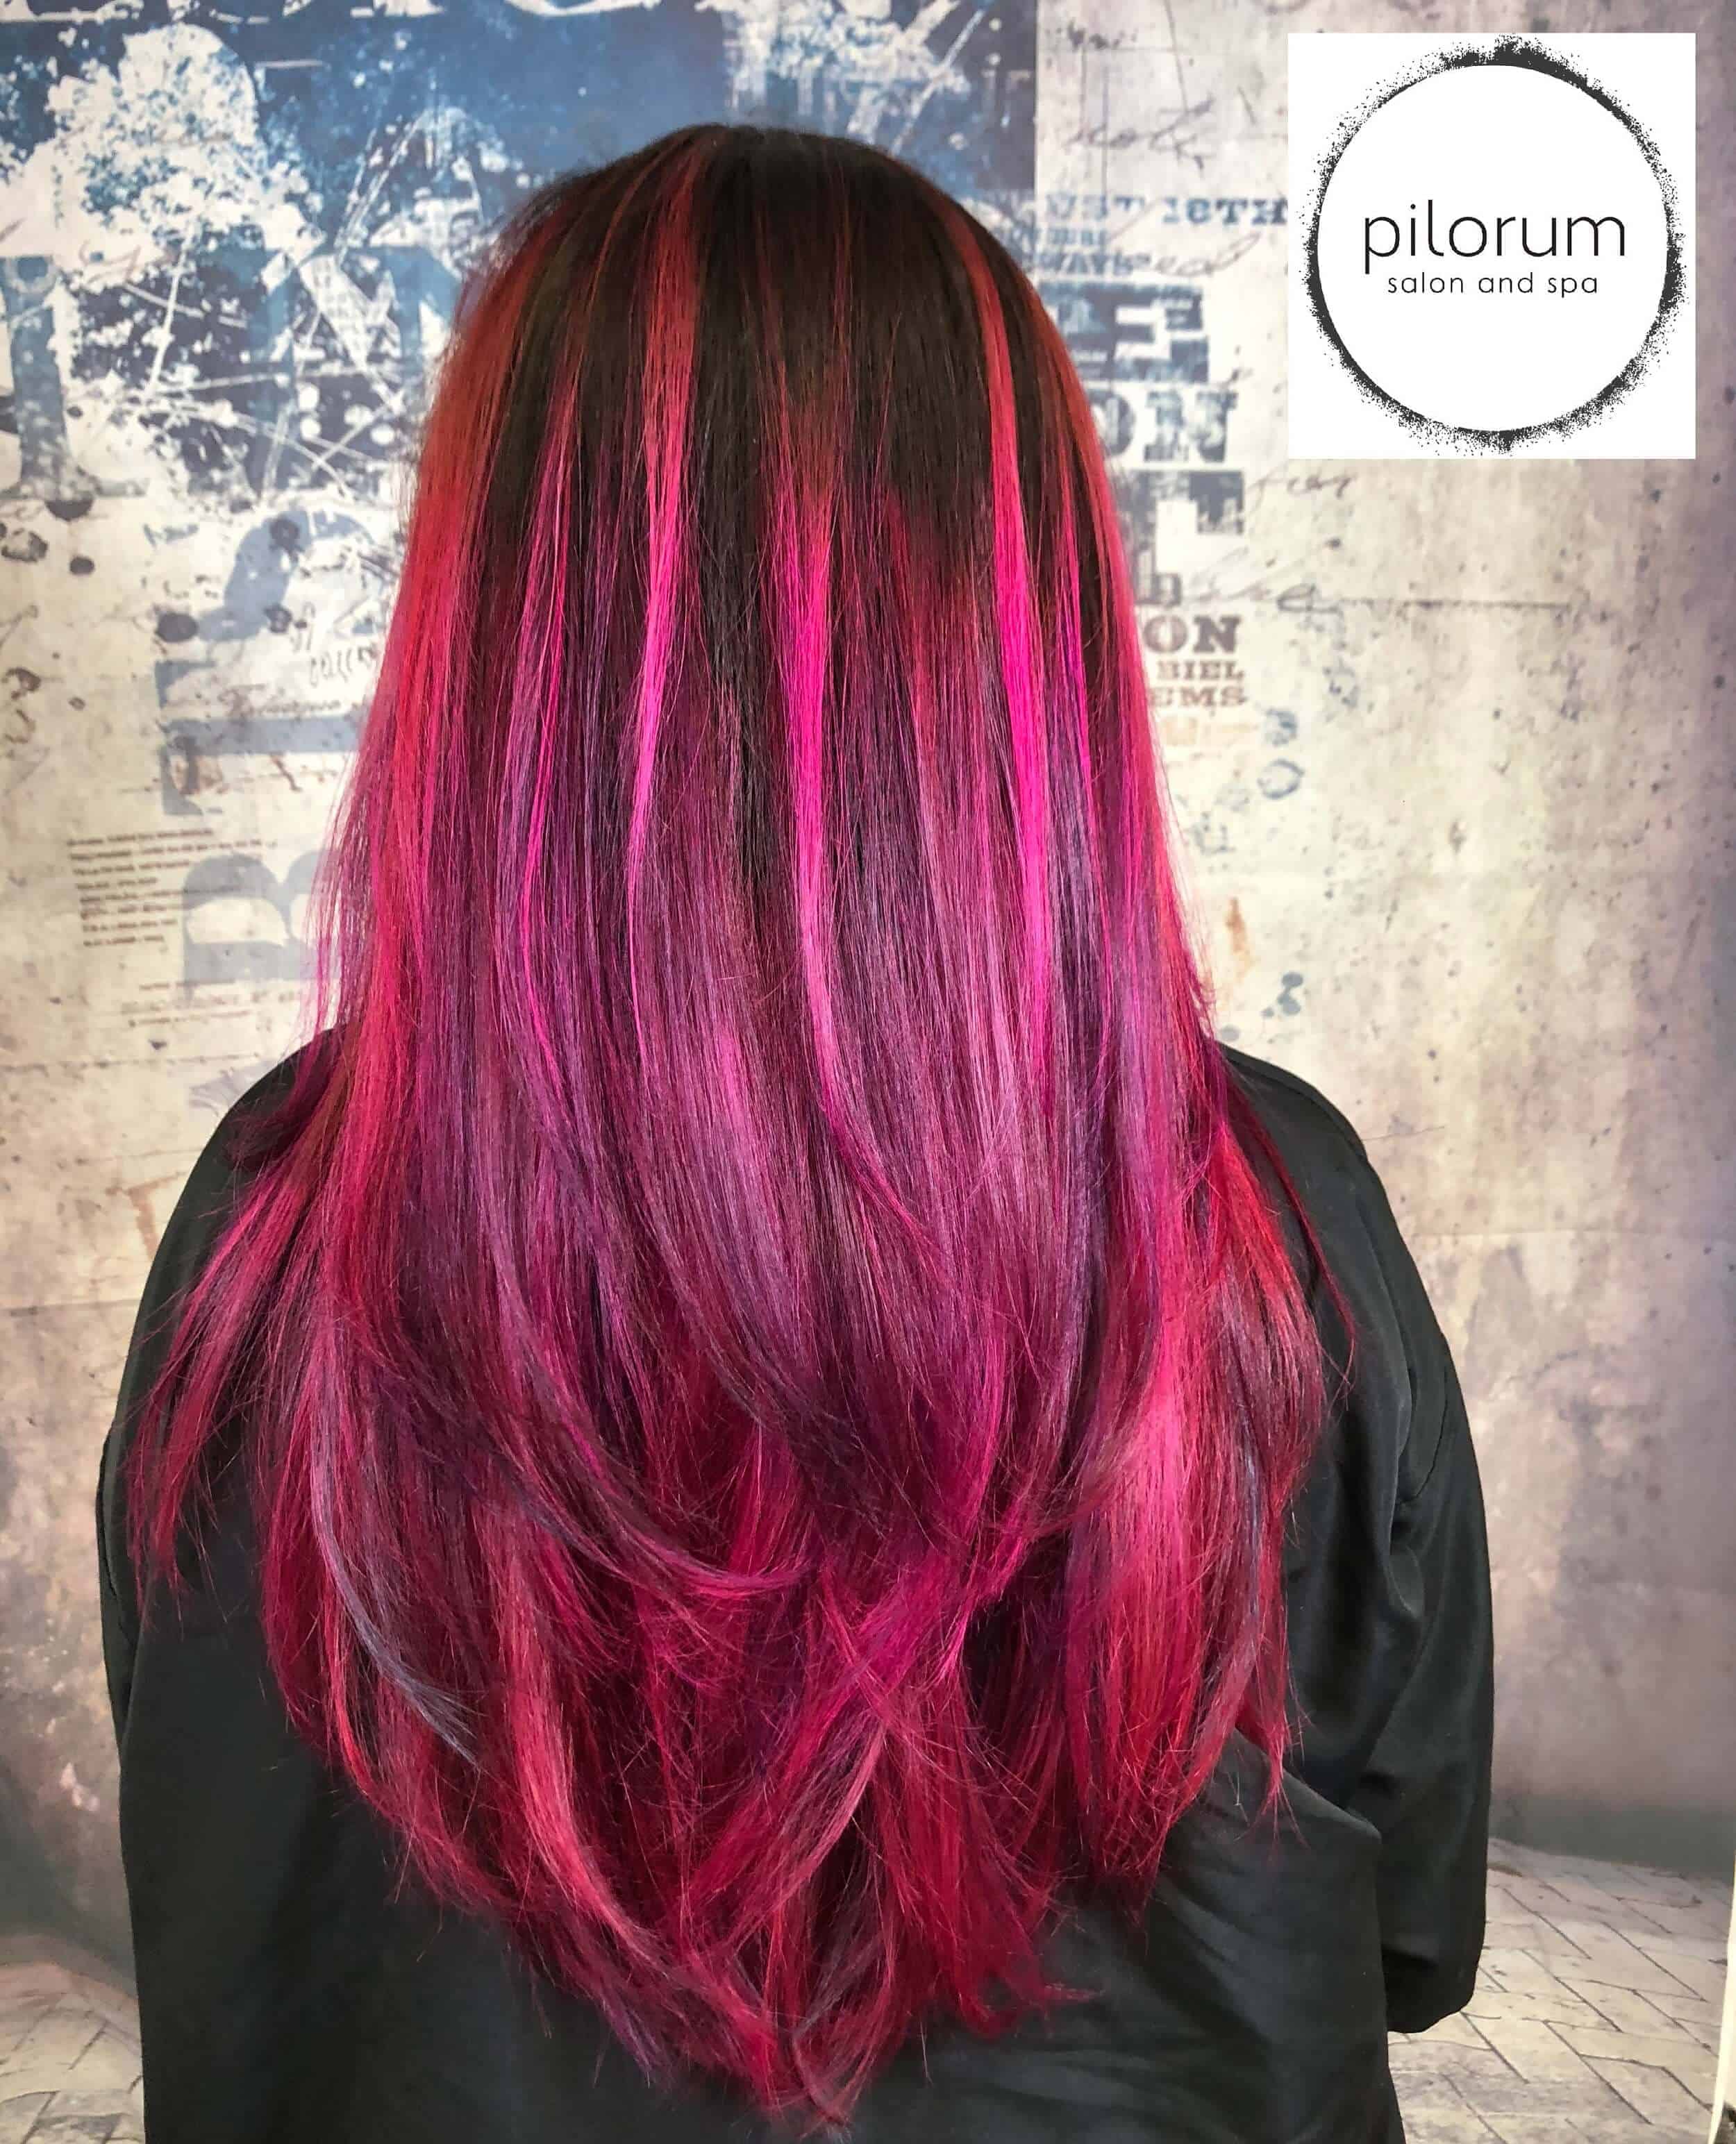 Red Hair Color Images | Pilorum Salon and Spa